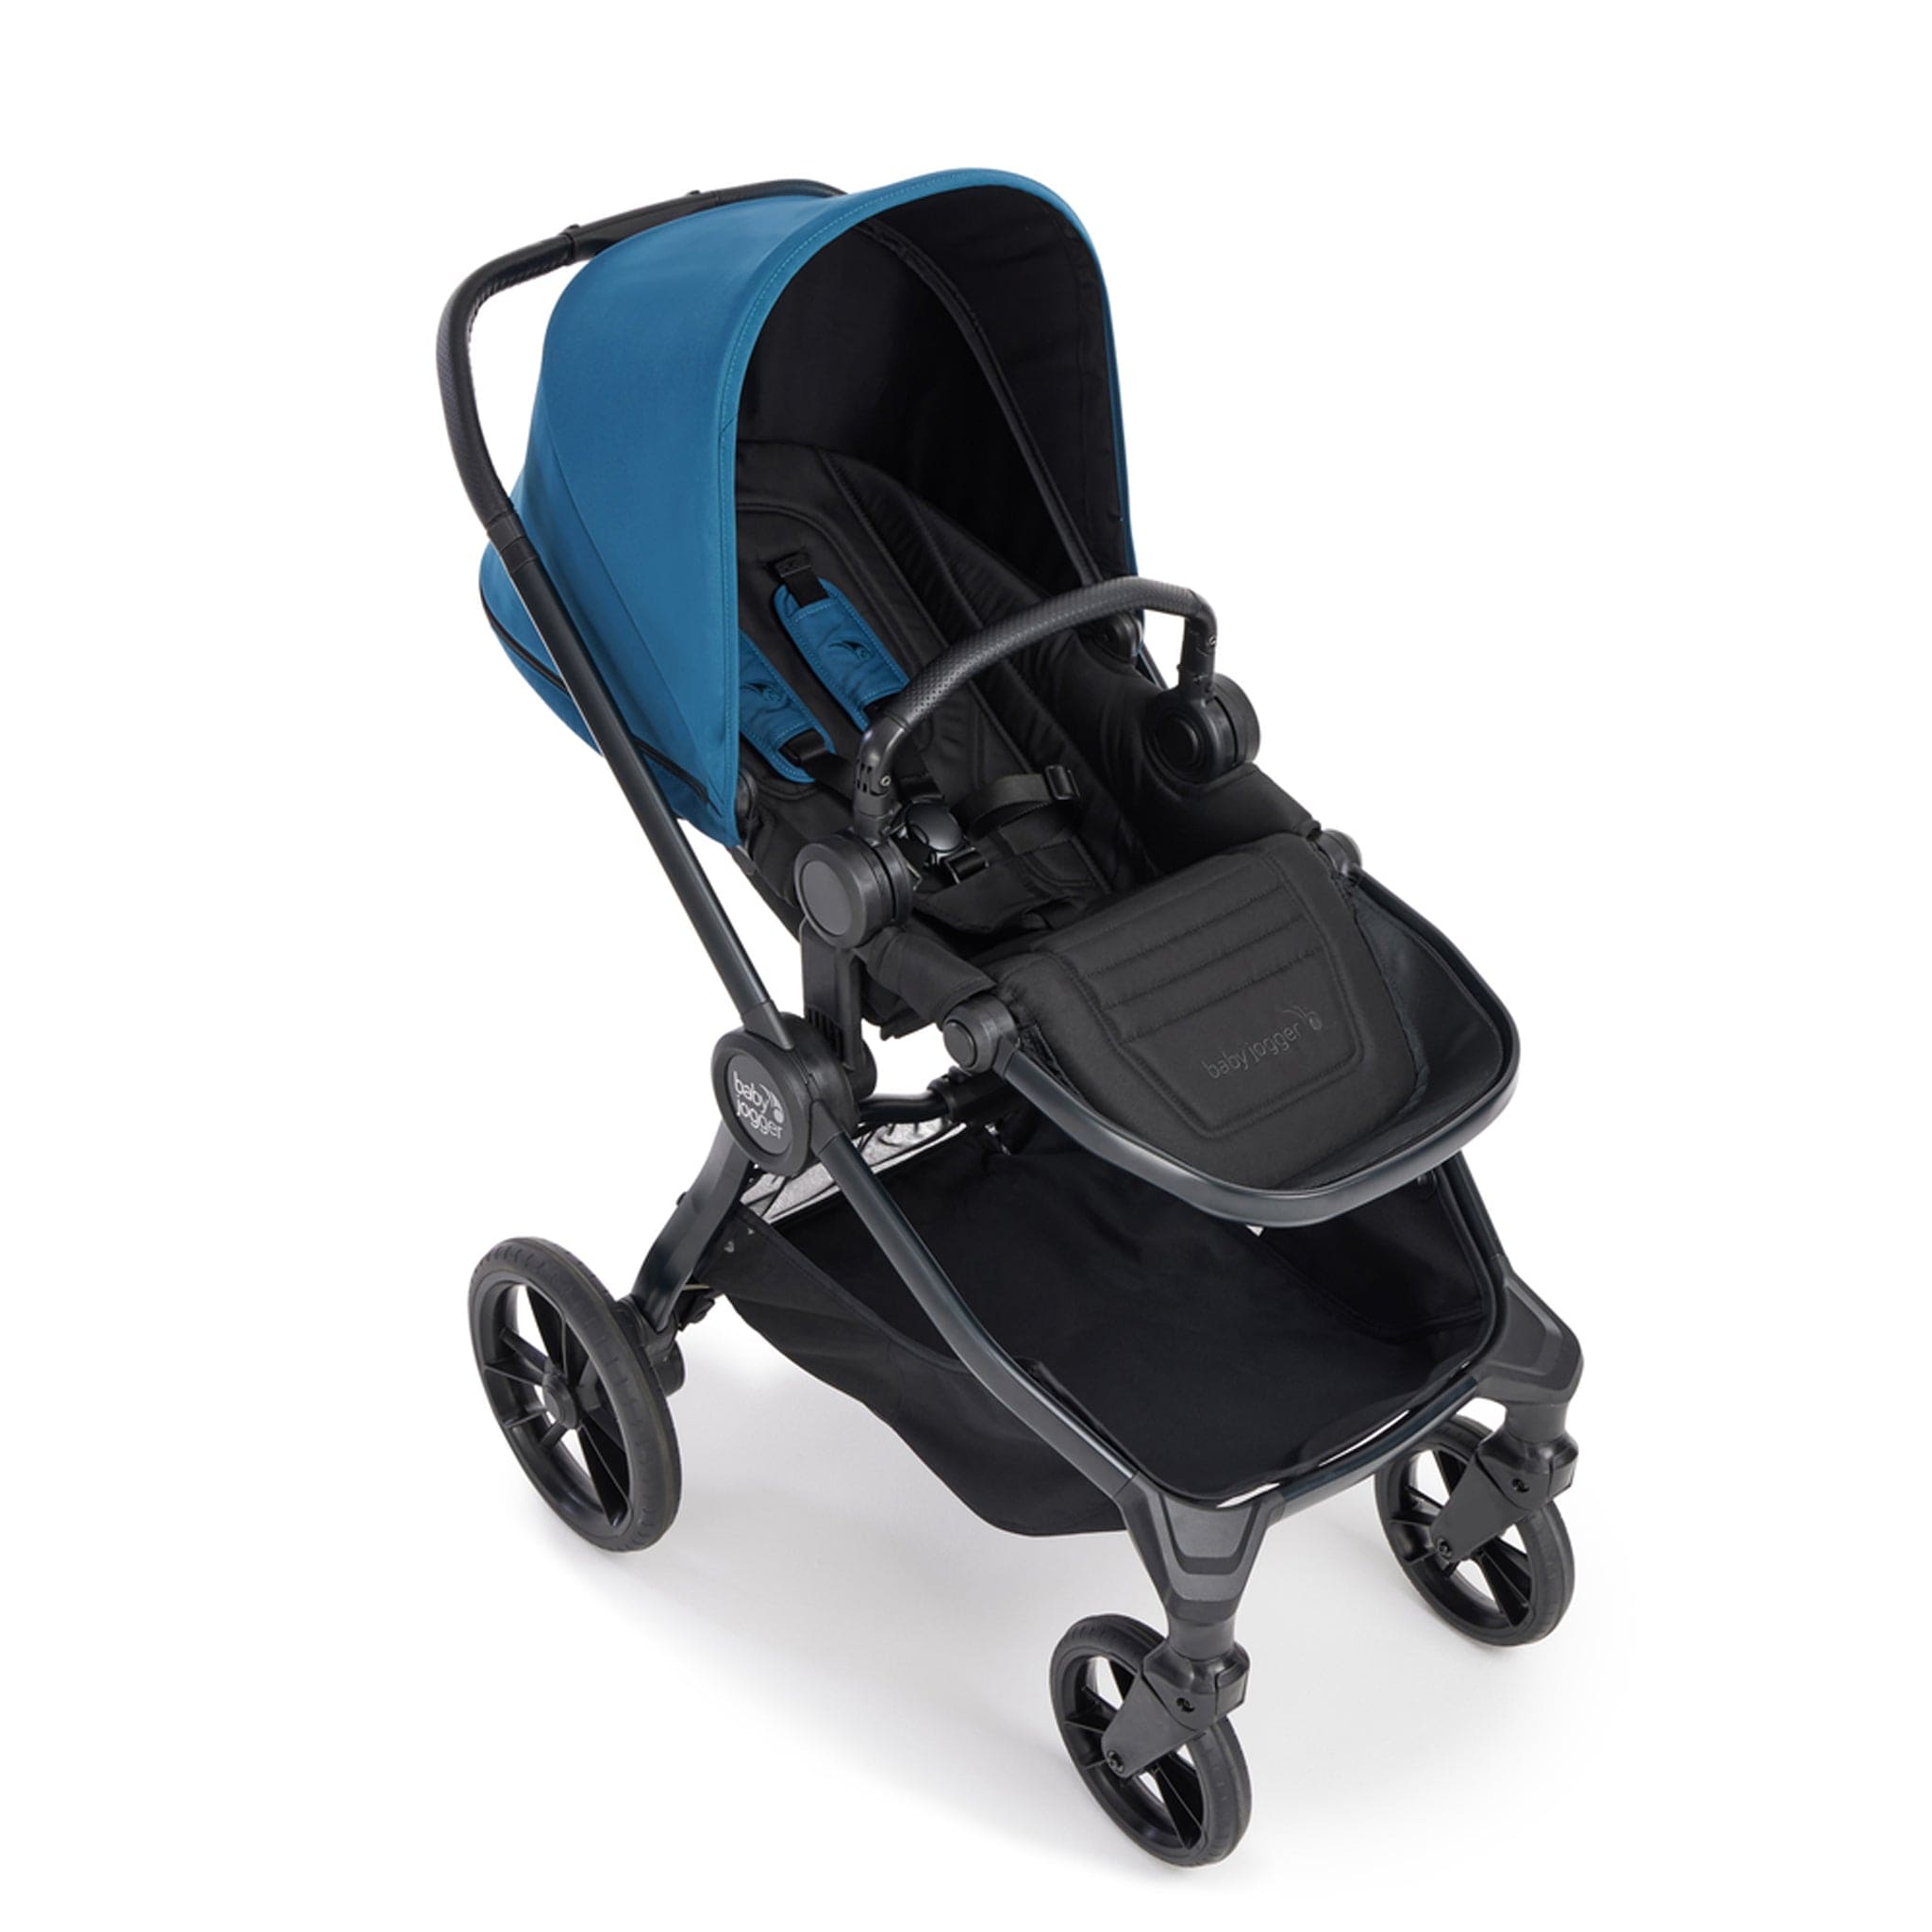 Baby Jogger City Sights Cabriofix i-Size Bundle in Deep Teal Pushchairs & Buggies 0047406183692